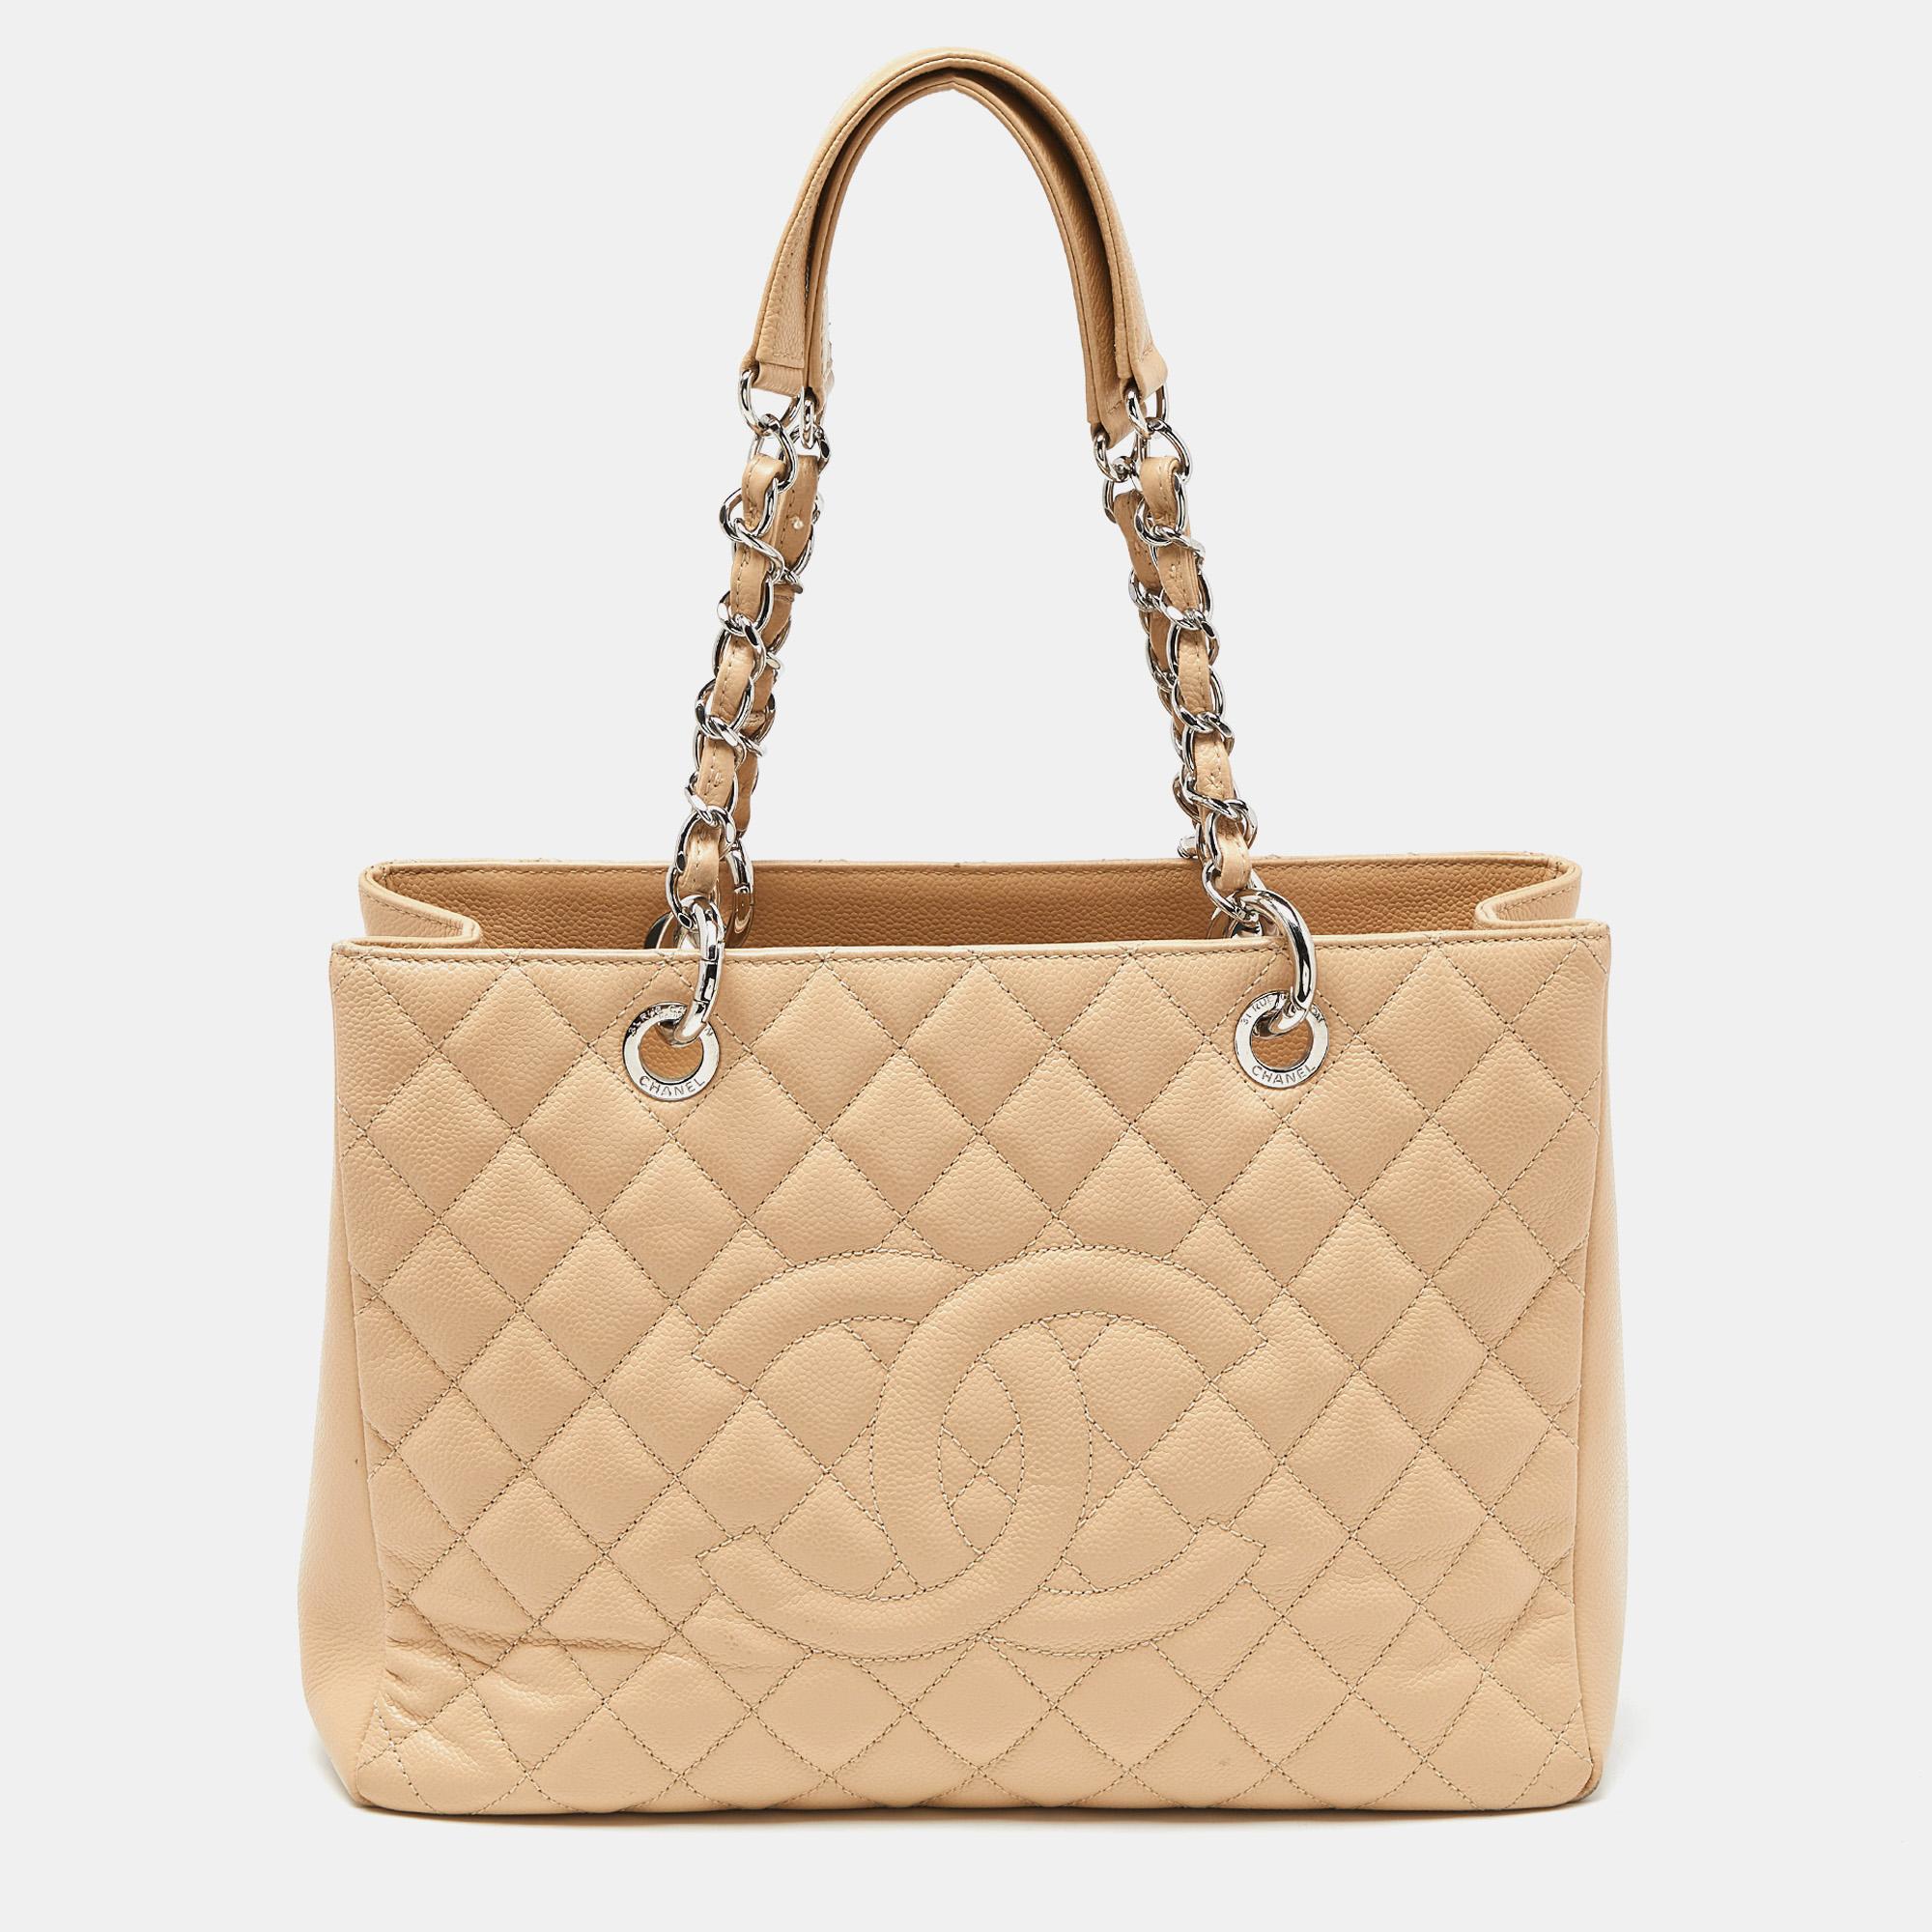 Crafted from quality materials, your wardrobe is missing out on this beautifully made Chanel shopper bag. Look your fashionable best in any outfit with this stylish bag that promises to elevate your ensemble.

Includes: Authenticity Card, Info